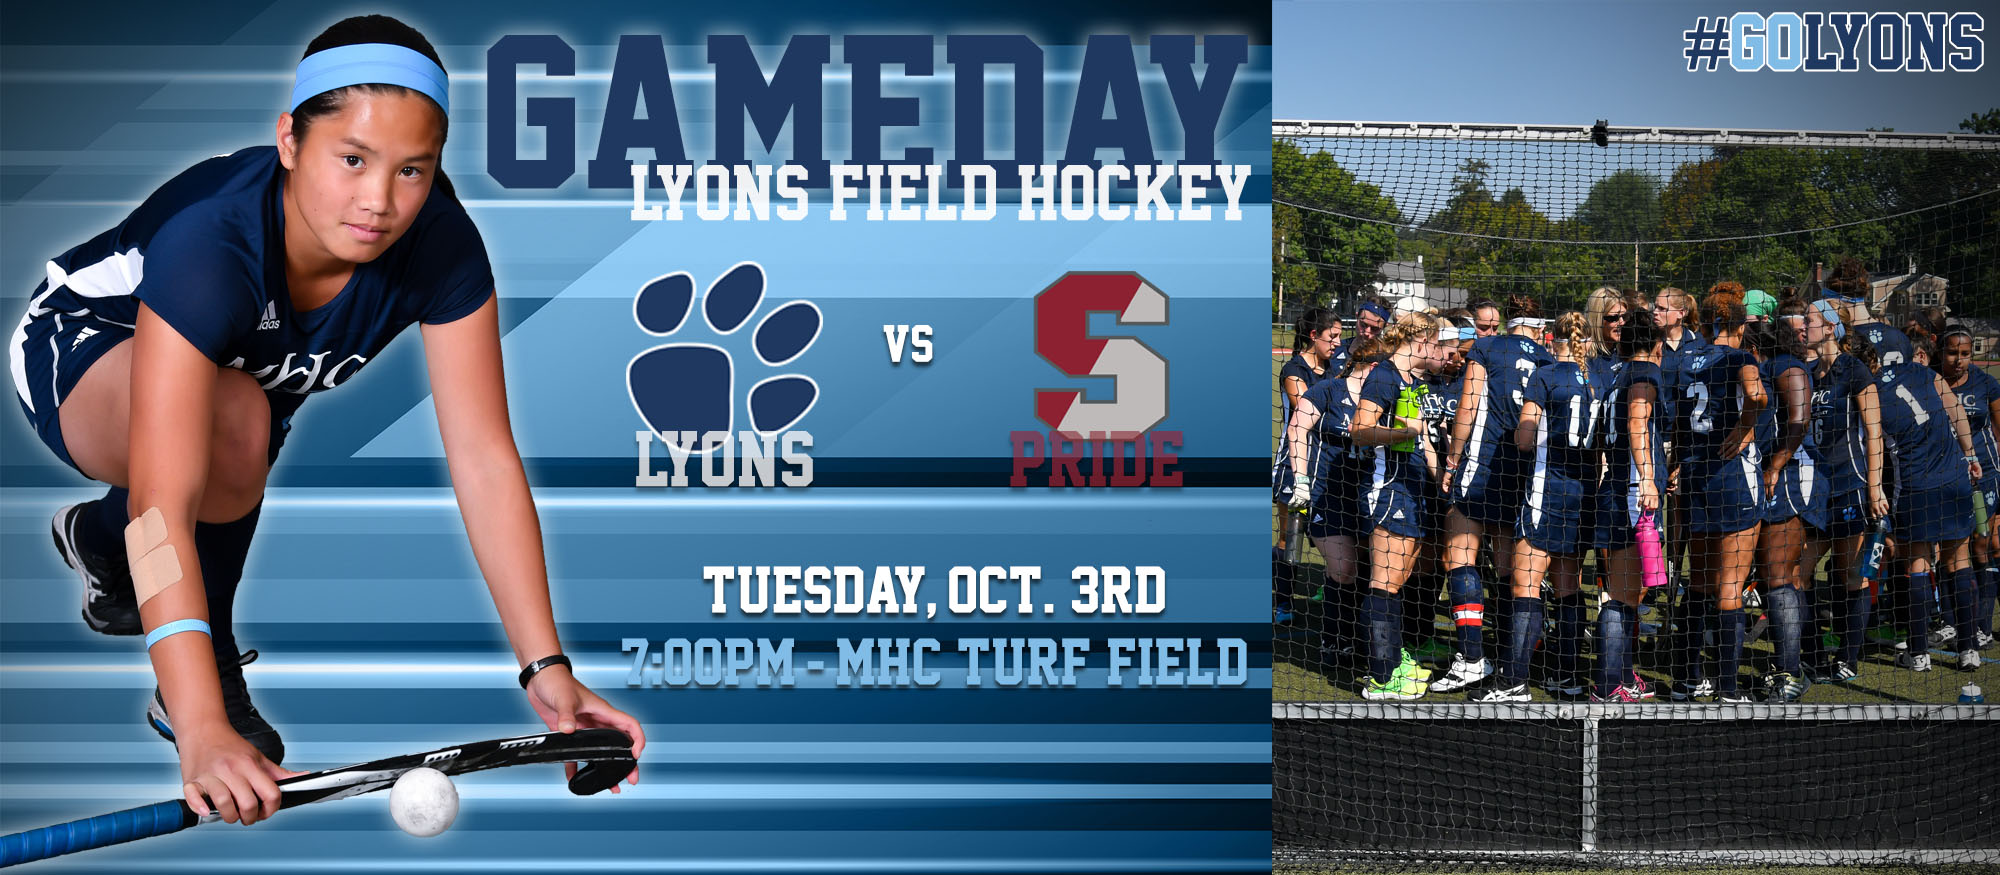 Gameday preview image for Lyons field hockey versus Springfield College on October 3rd on the Turf Field